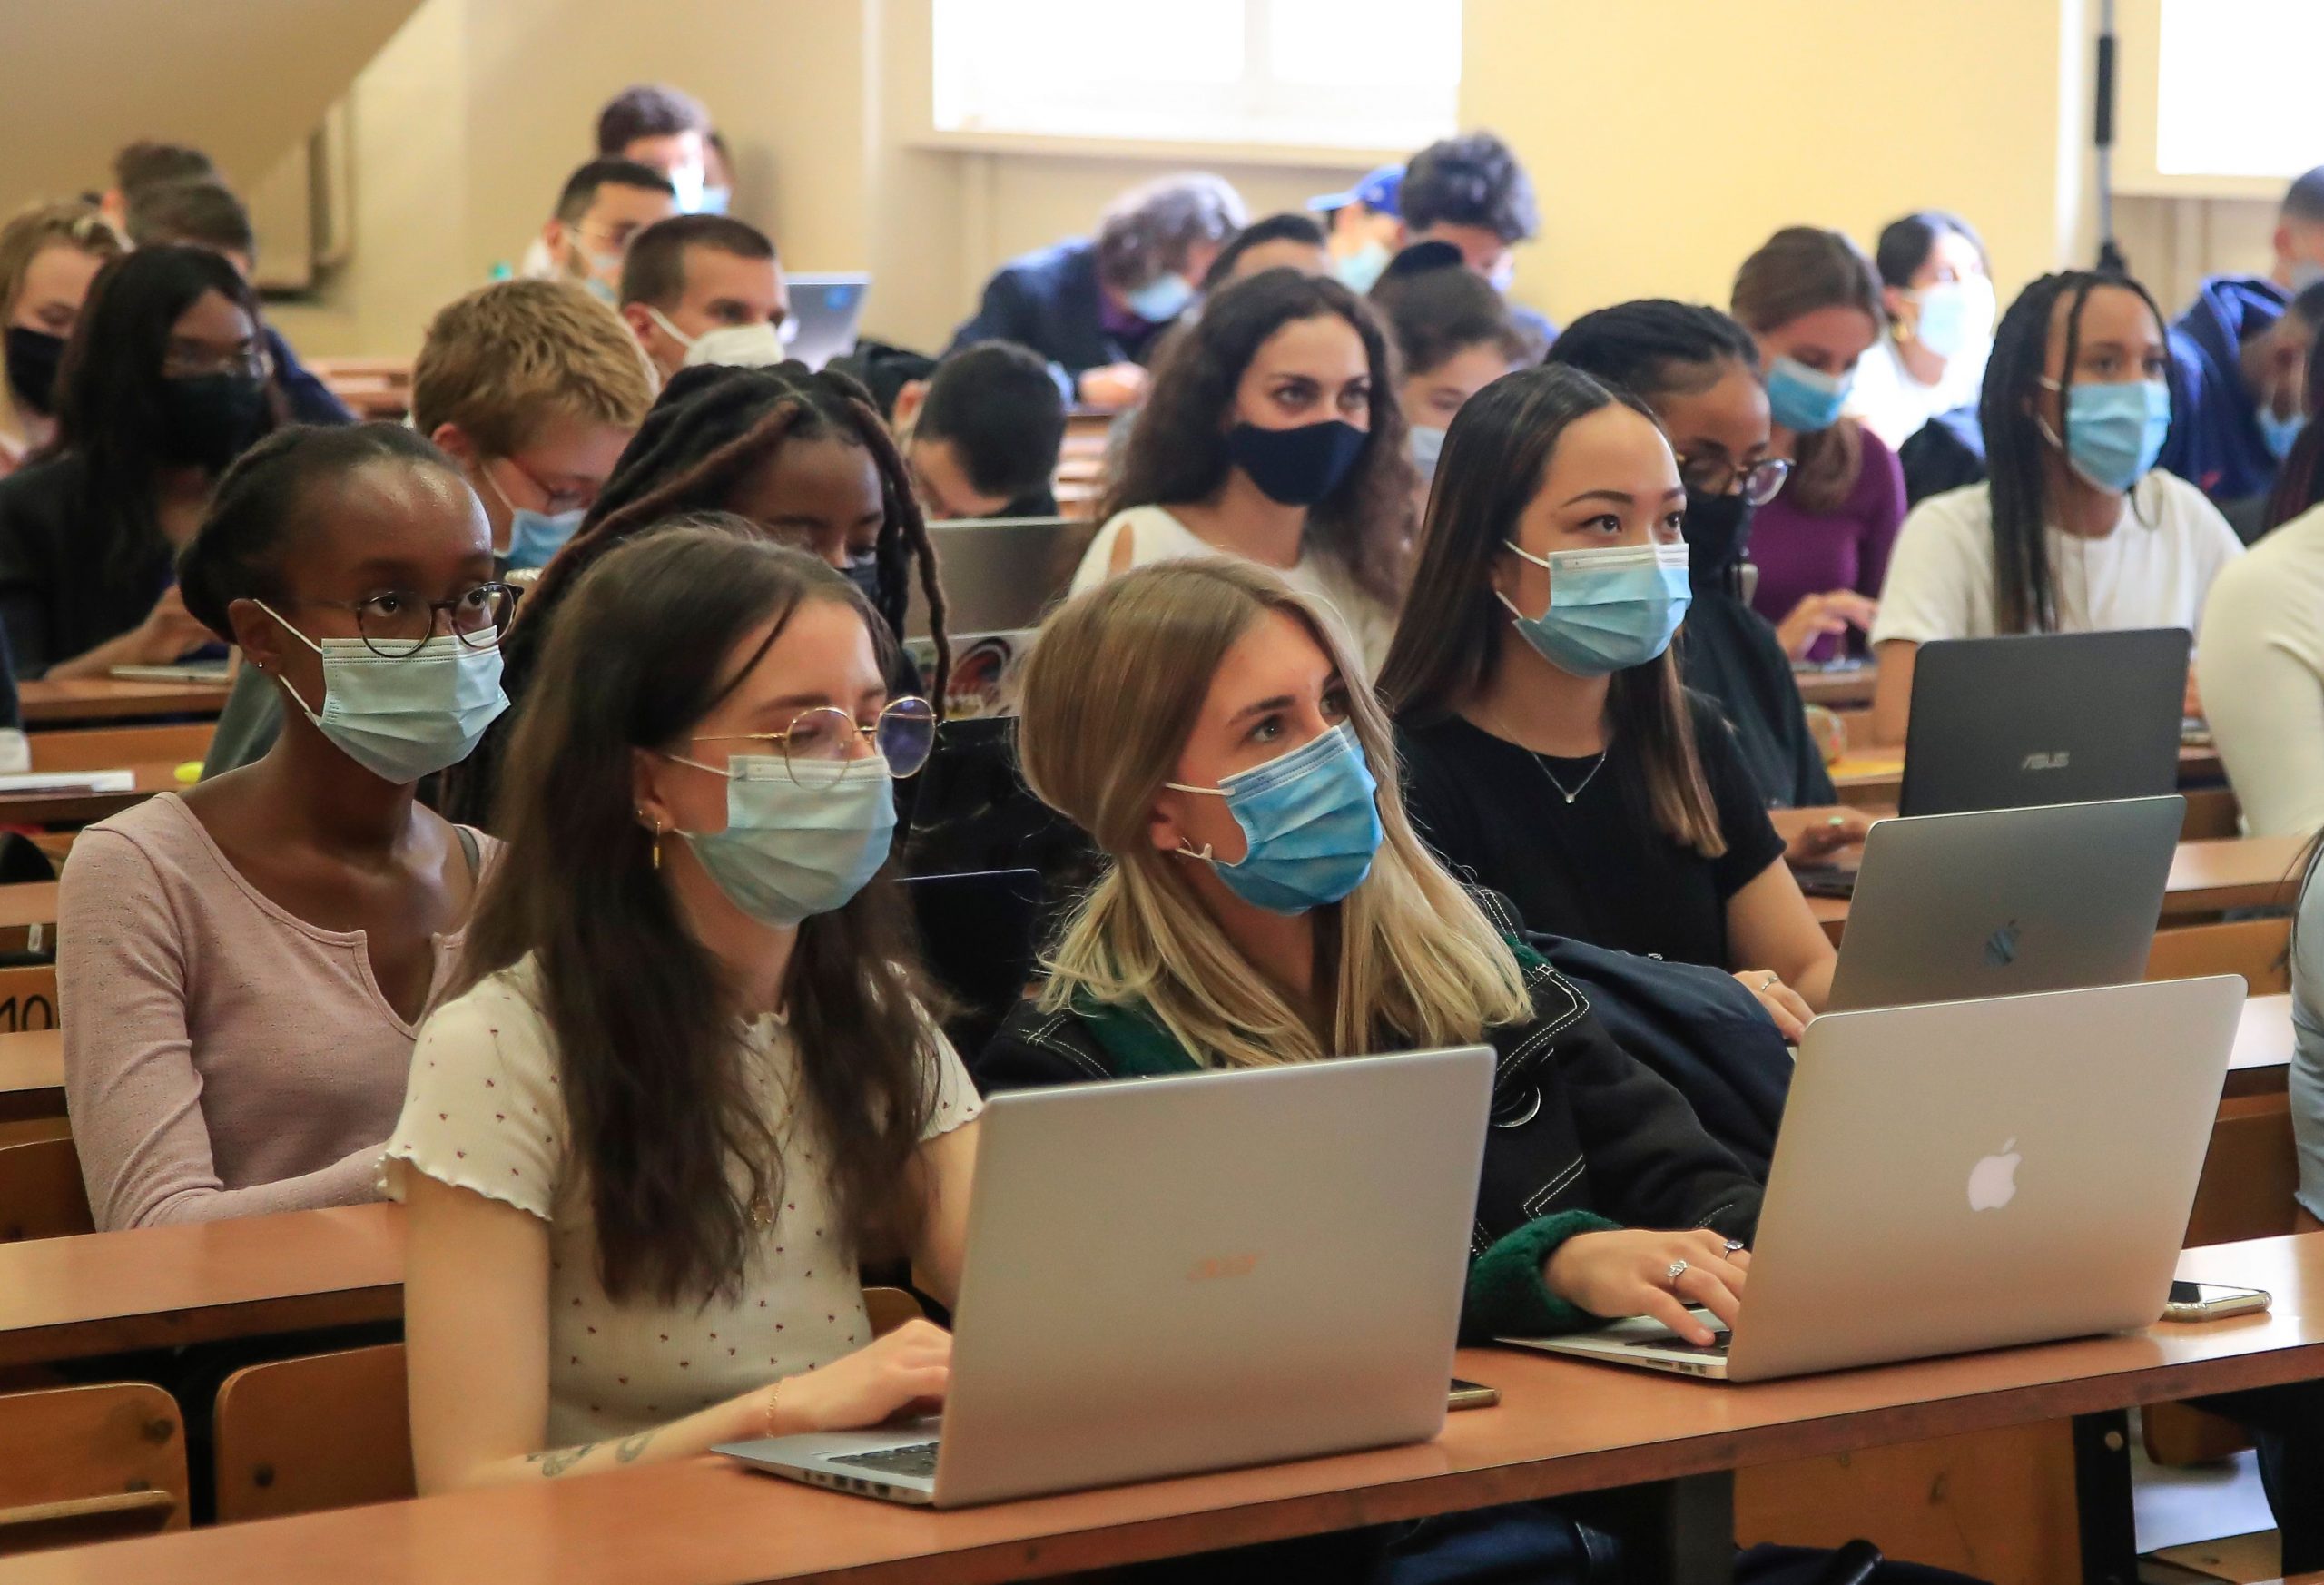 Students attending to school during the Coronavirus pandemic